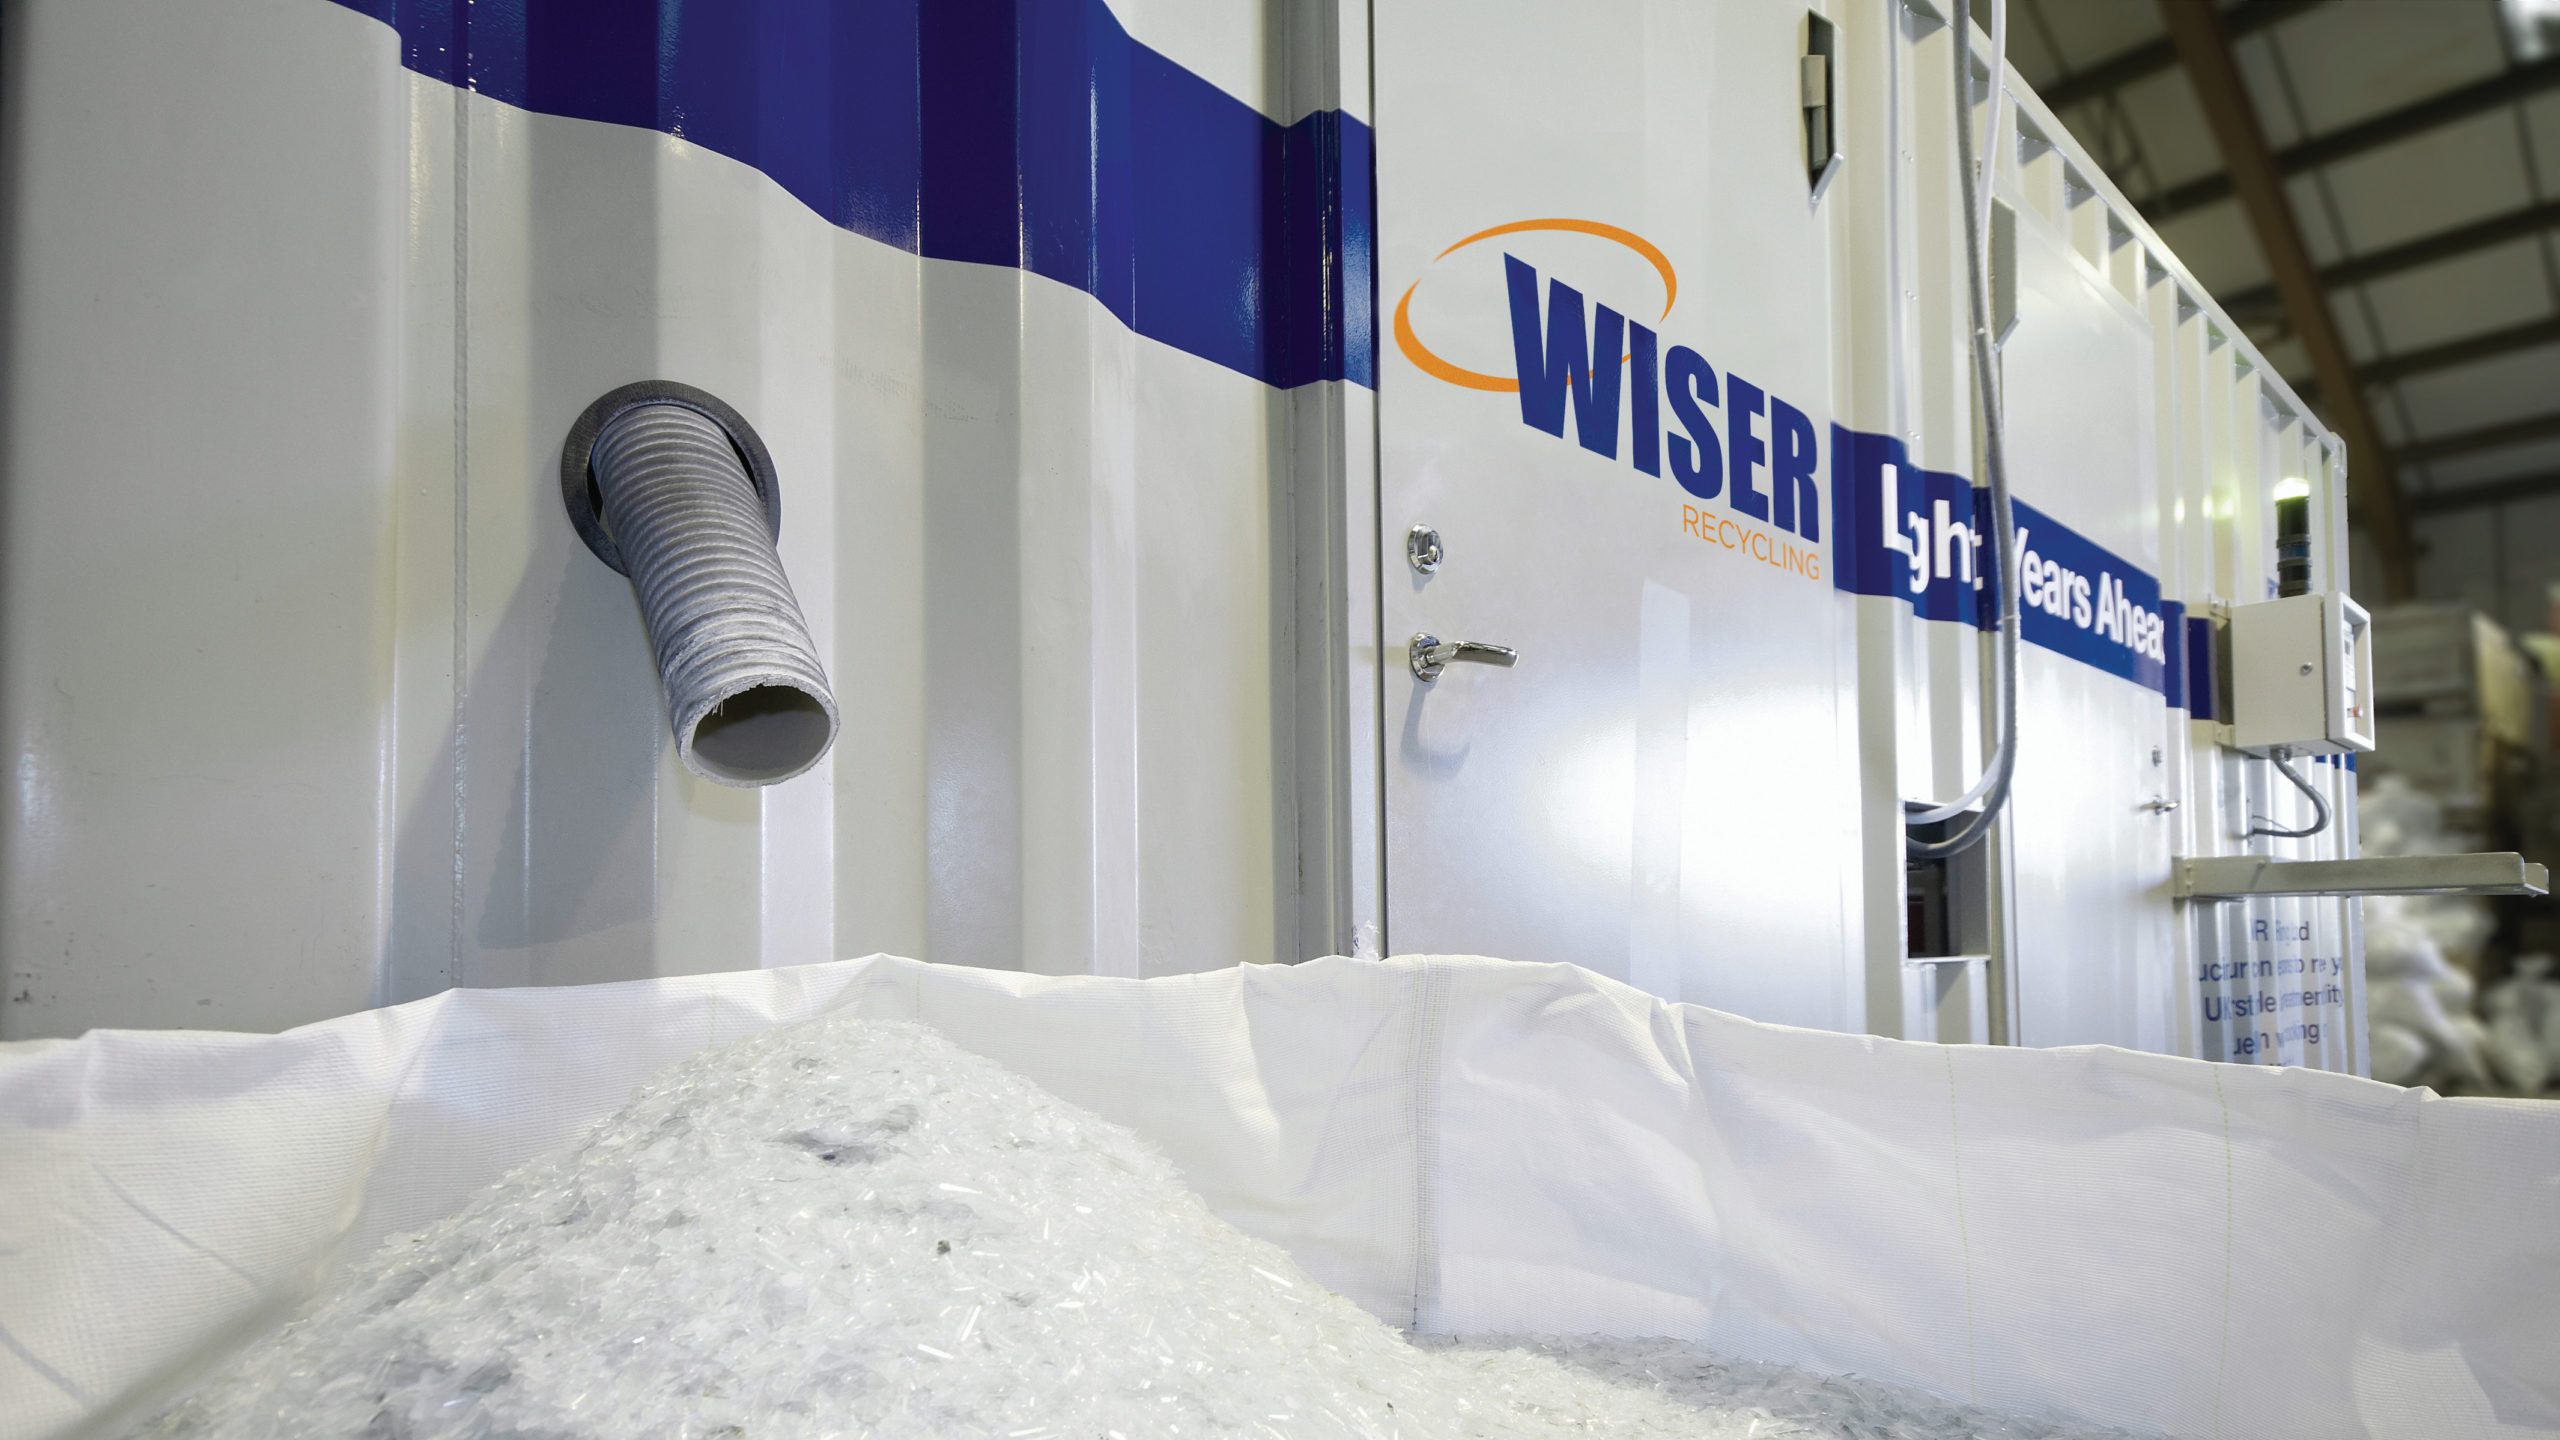 Wiser Recycling provides compliant fluorescent tube recycling